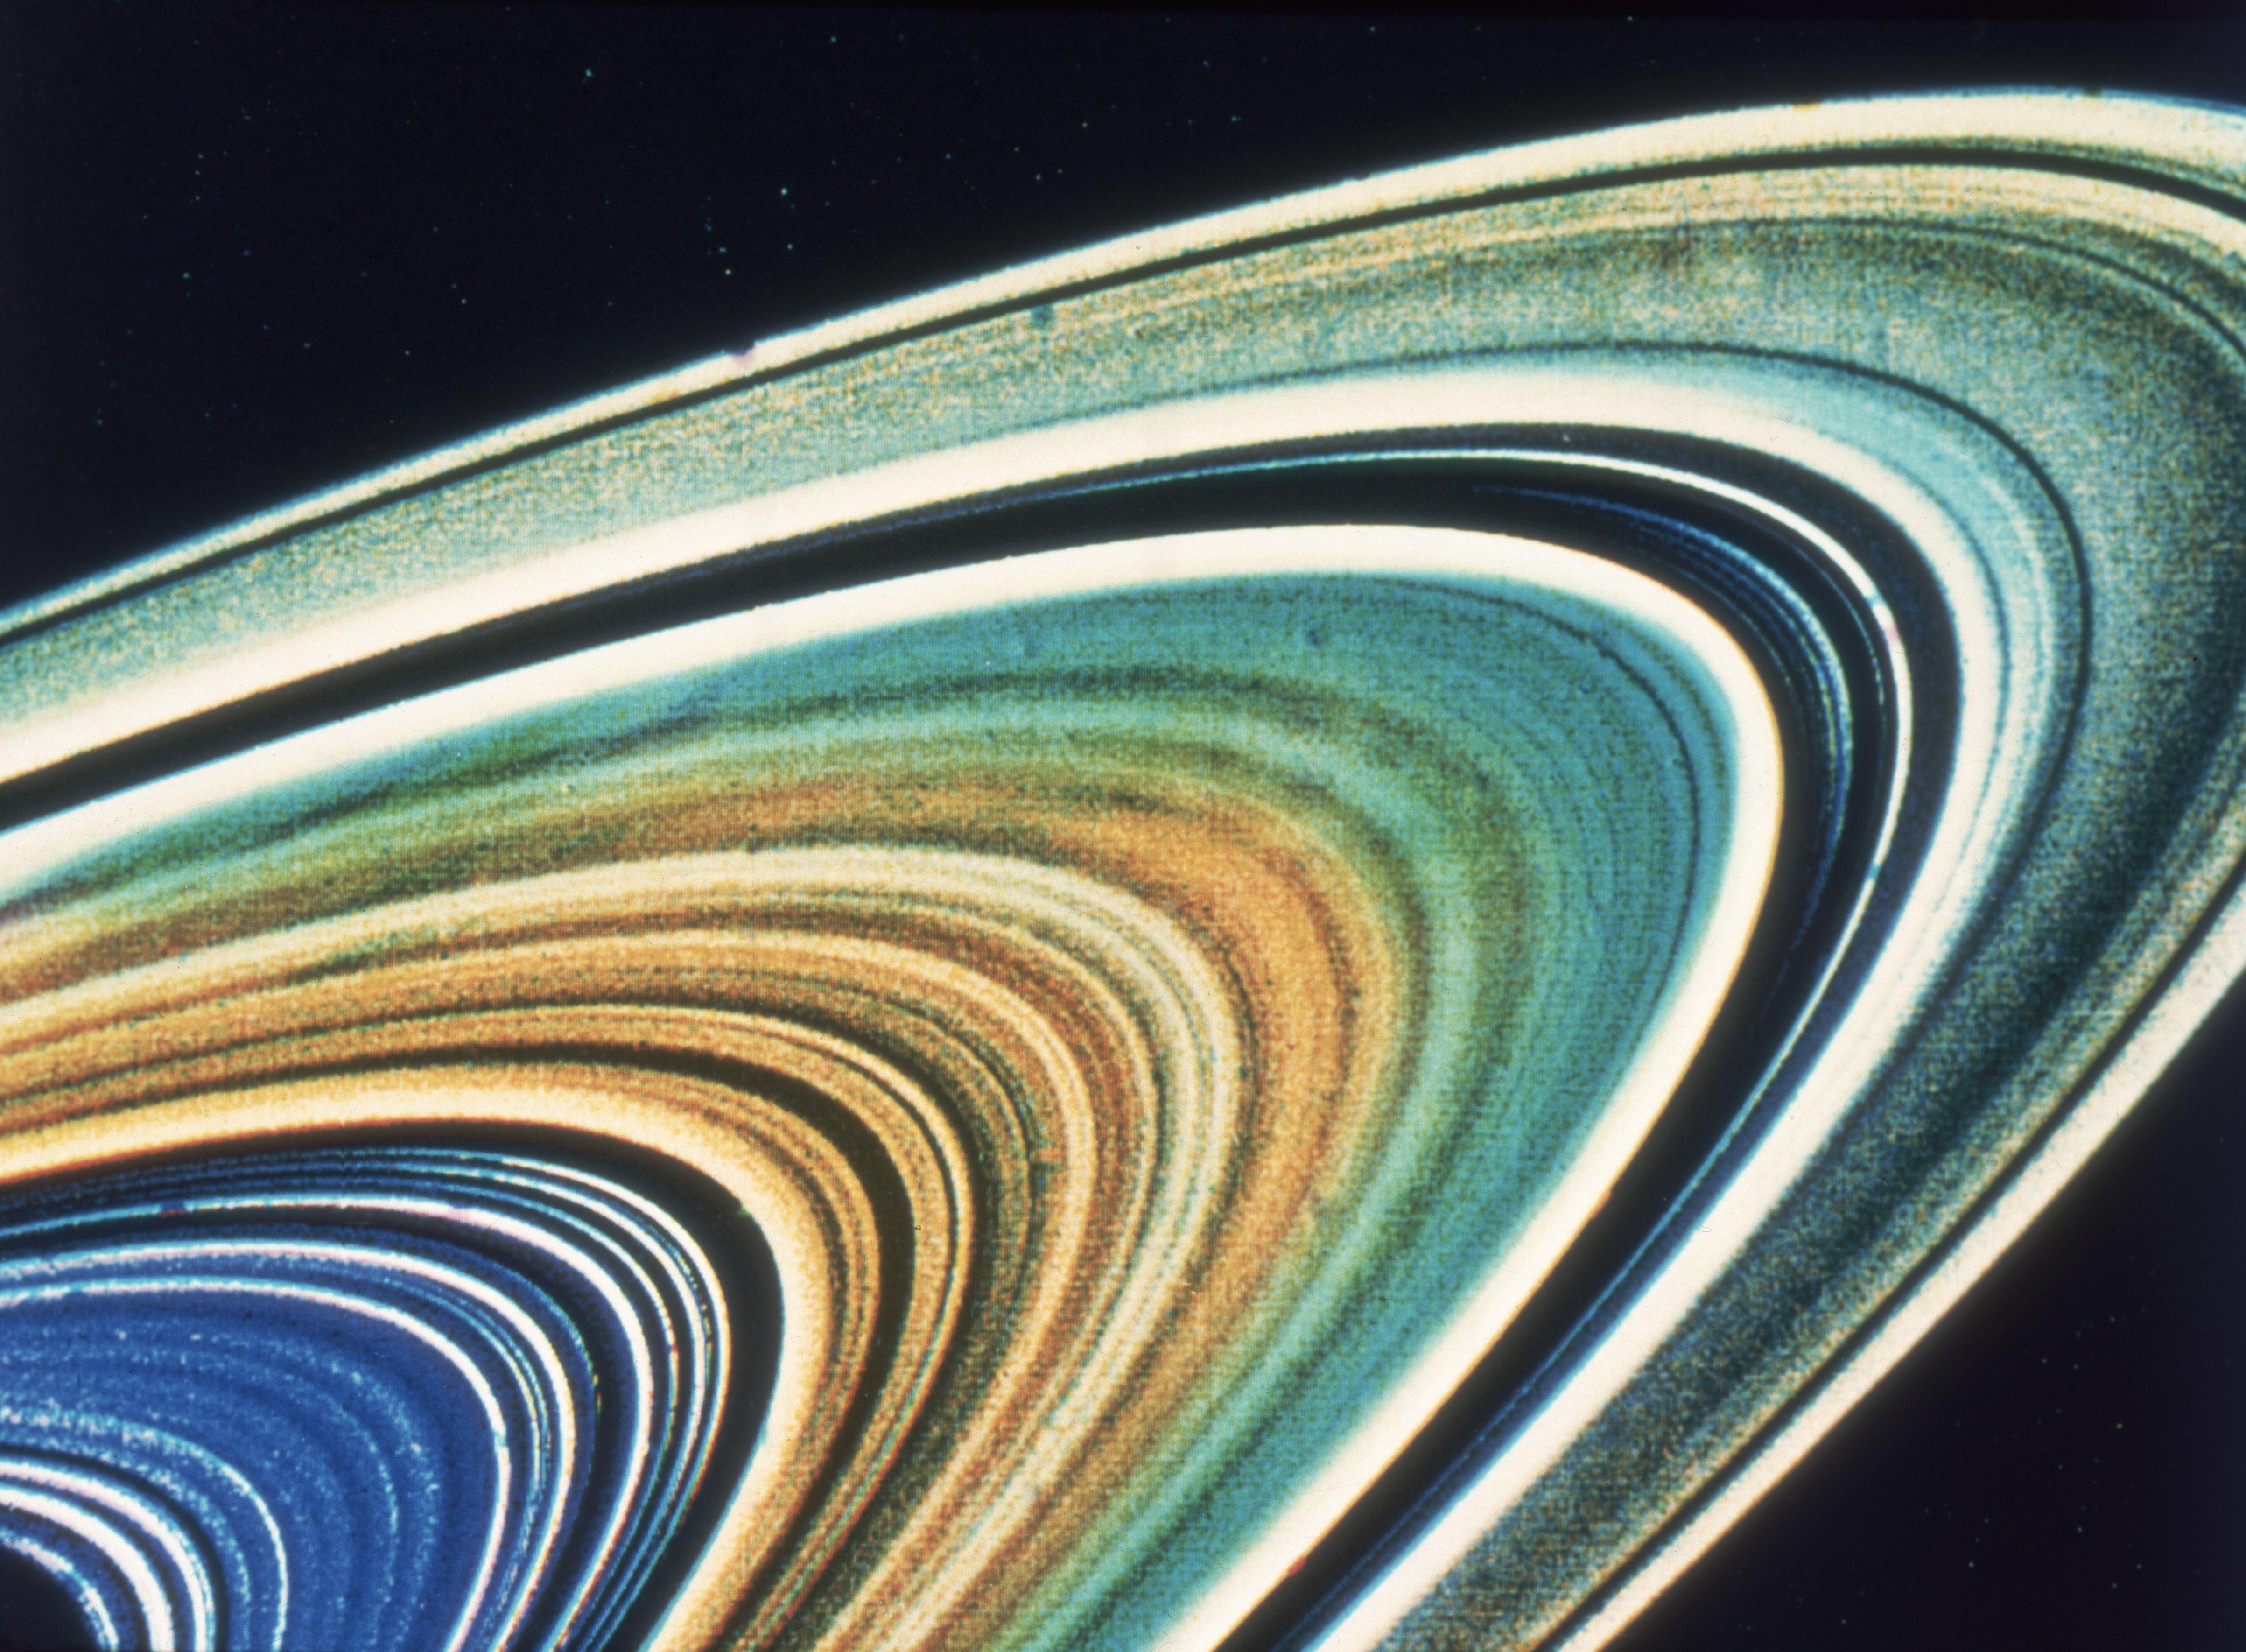 An enhanced color image of Saturn's rings taken from the Voyager 2 spacecraft on Aug. 1981.